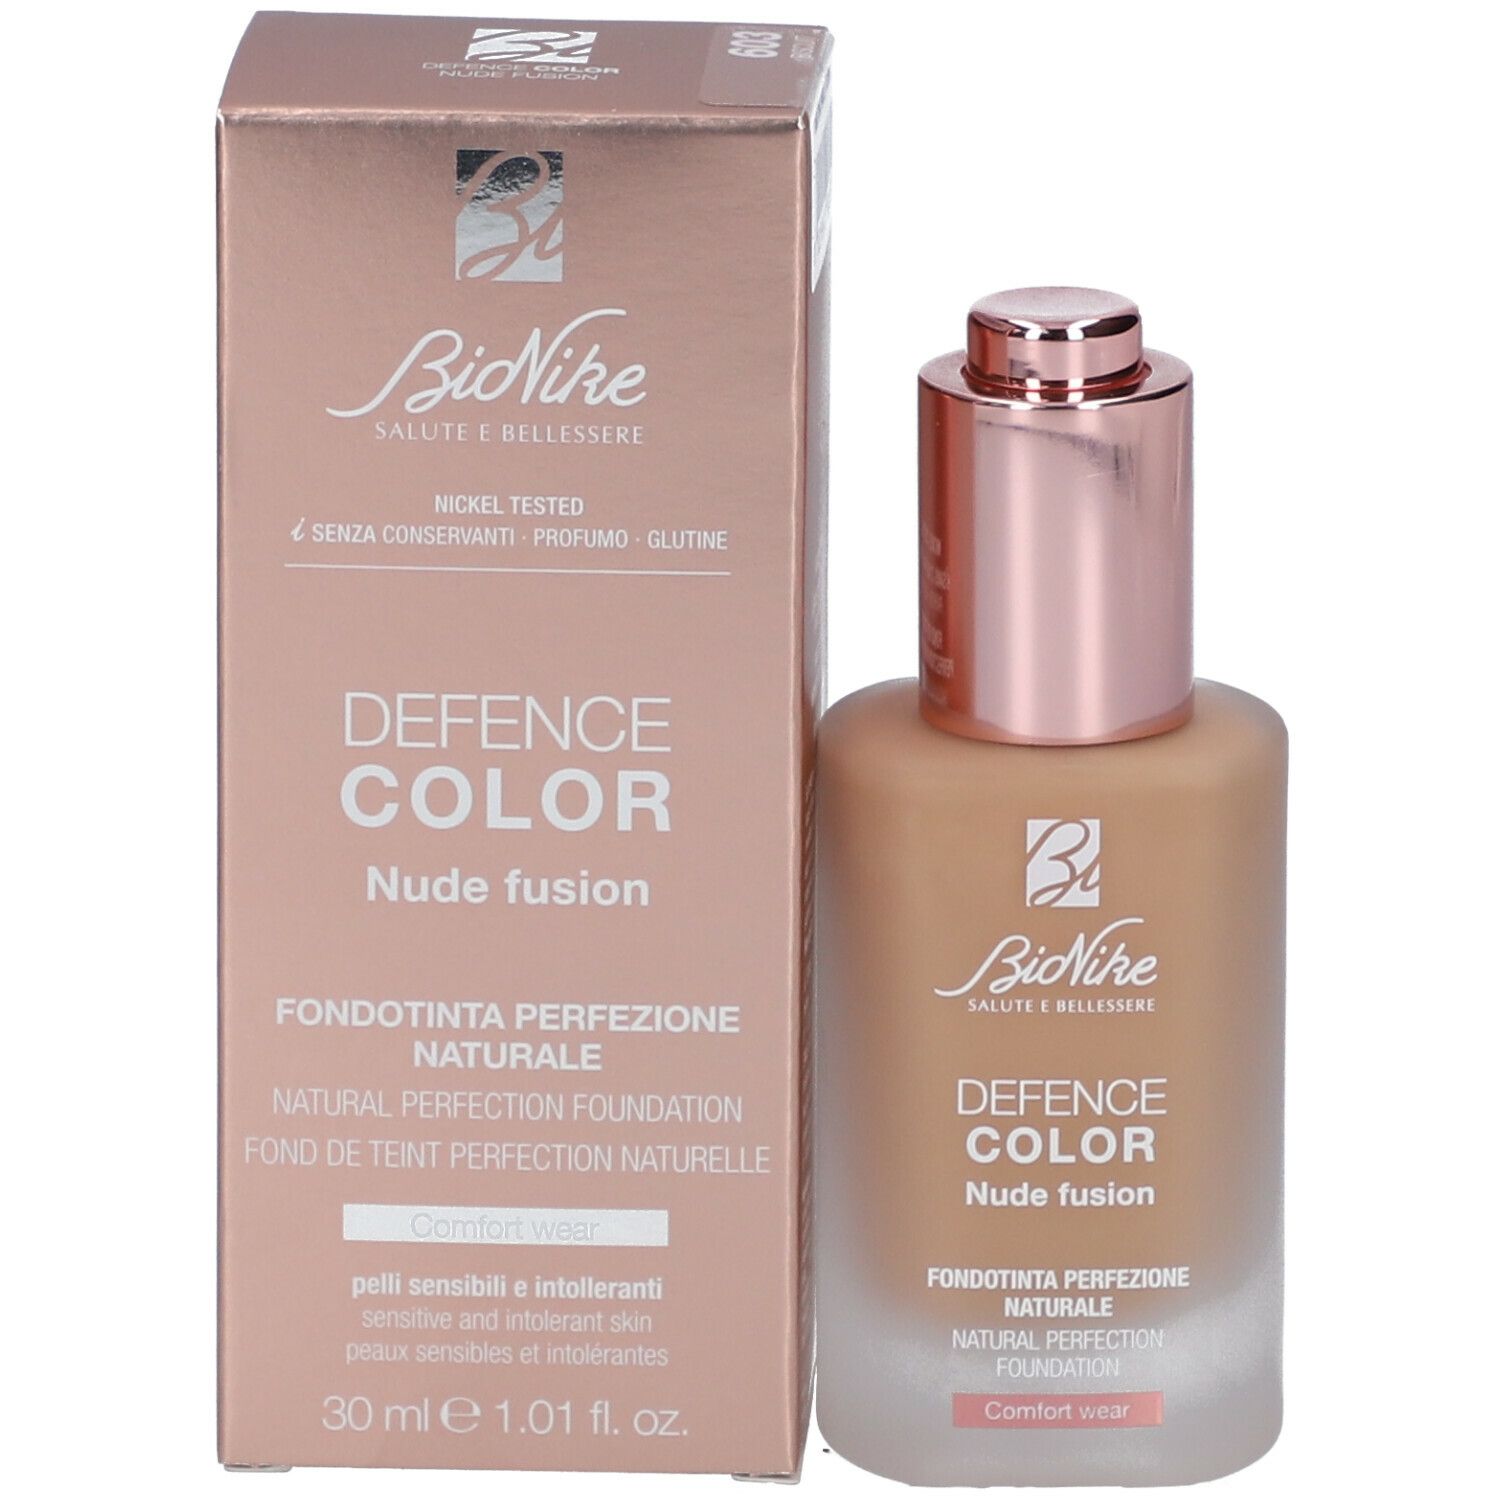 BioNike Defence Color Nude Fusion 603 Biscuit